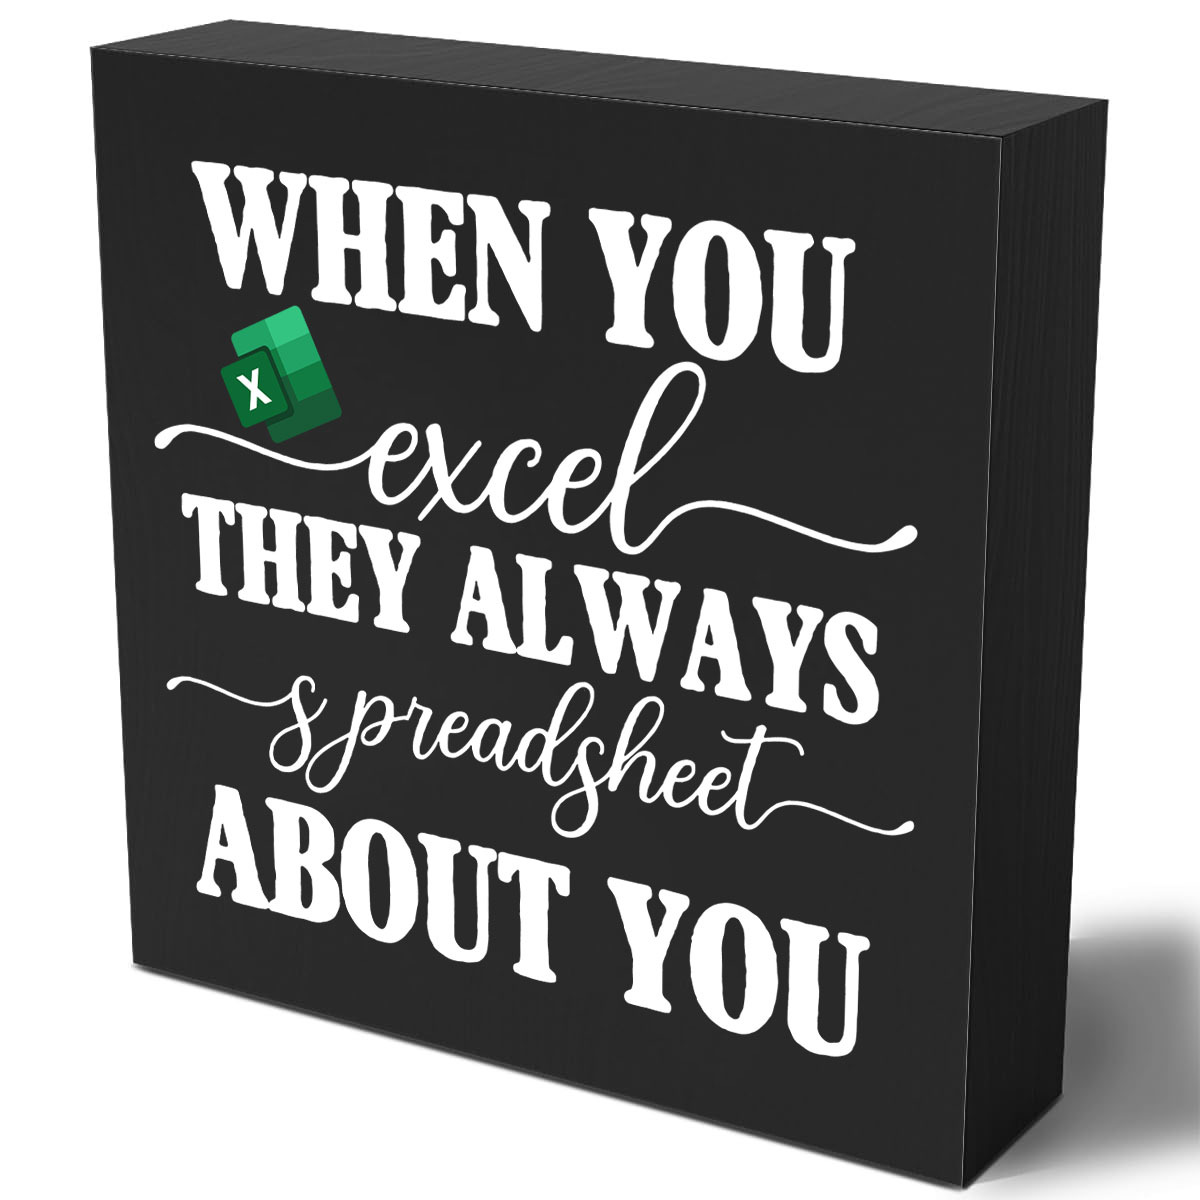 

1pc, Excel In Style With Our Accountant Quote Wooden Box Sign - Perfect Desk Decor For Office Or Home